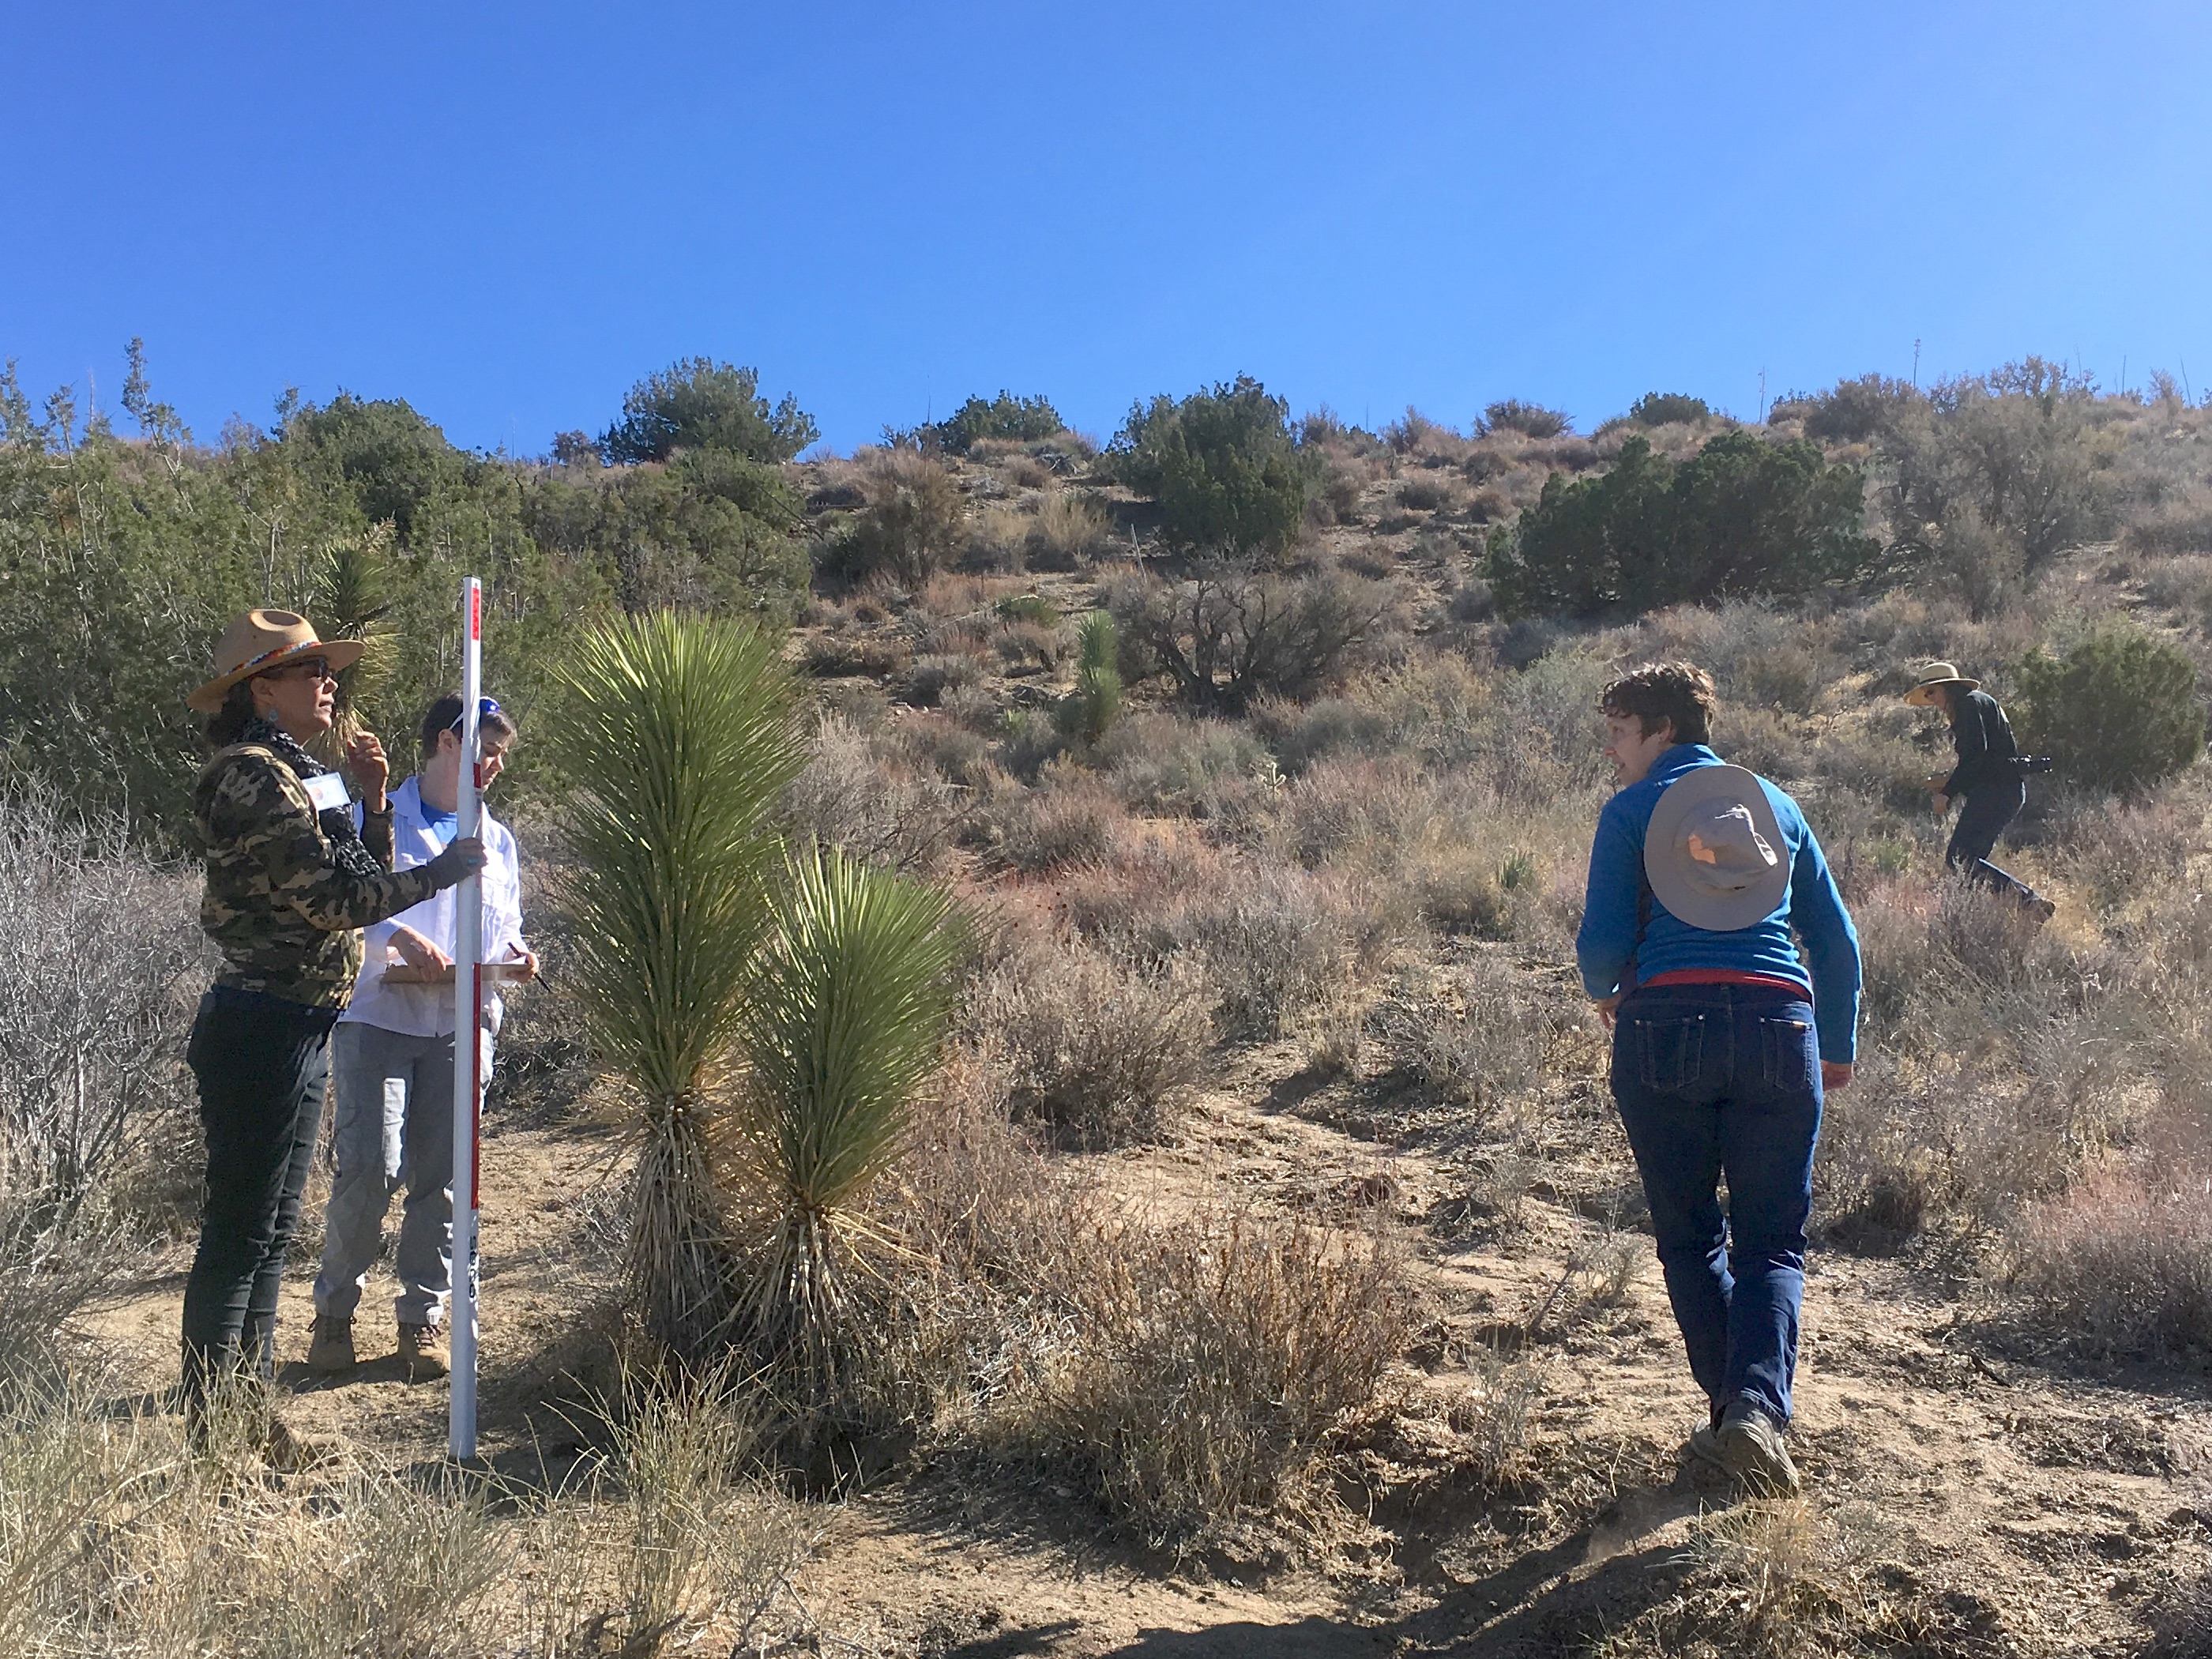 Volunteer leaders measure a Joshua tree during a pilot run of the survey protocol. (Photo by Jeremy Yoder.)